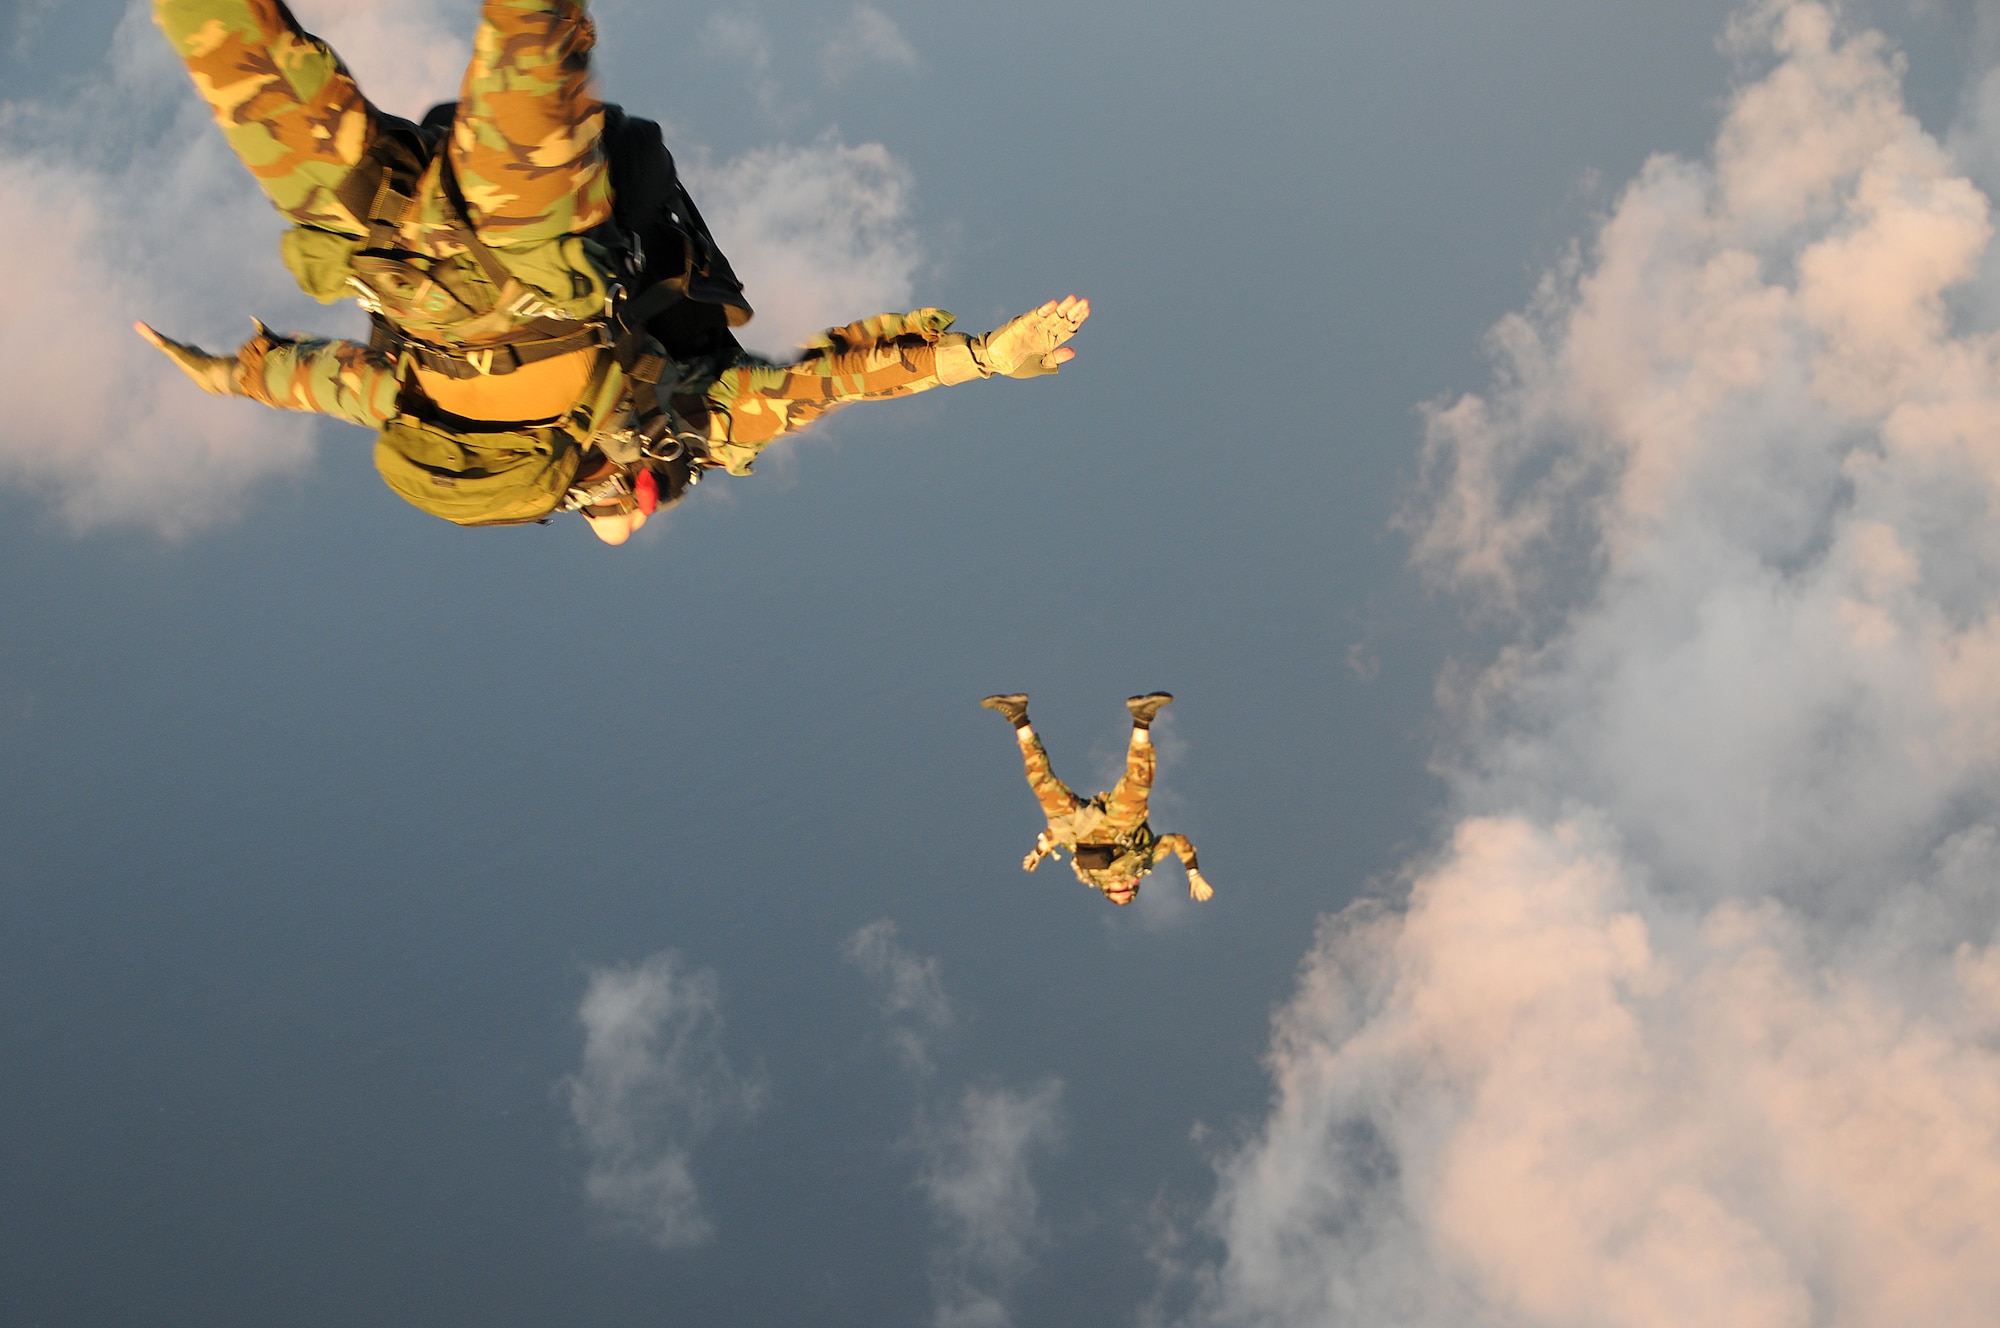 Pararescue specialists assigned to the 31st Rescue Squadron at Kadena Air Base, Japan conduct a freefall jump out of an MC-130P at 10,000 feet over Ie Shima during a training mission Dec. 16, 2008. The 17th Special Operations Squadron flew 21 pararescuemen for a series of static line and freefall jumps and refueled two HH-60s from the 33rd Rescue Squadron during the flight. (U.S. Air Force photo/Staff Sgt Chrissy Best)